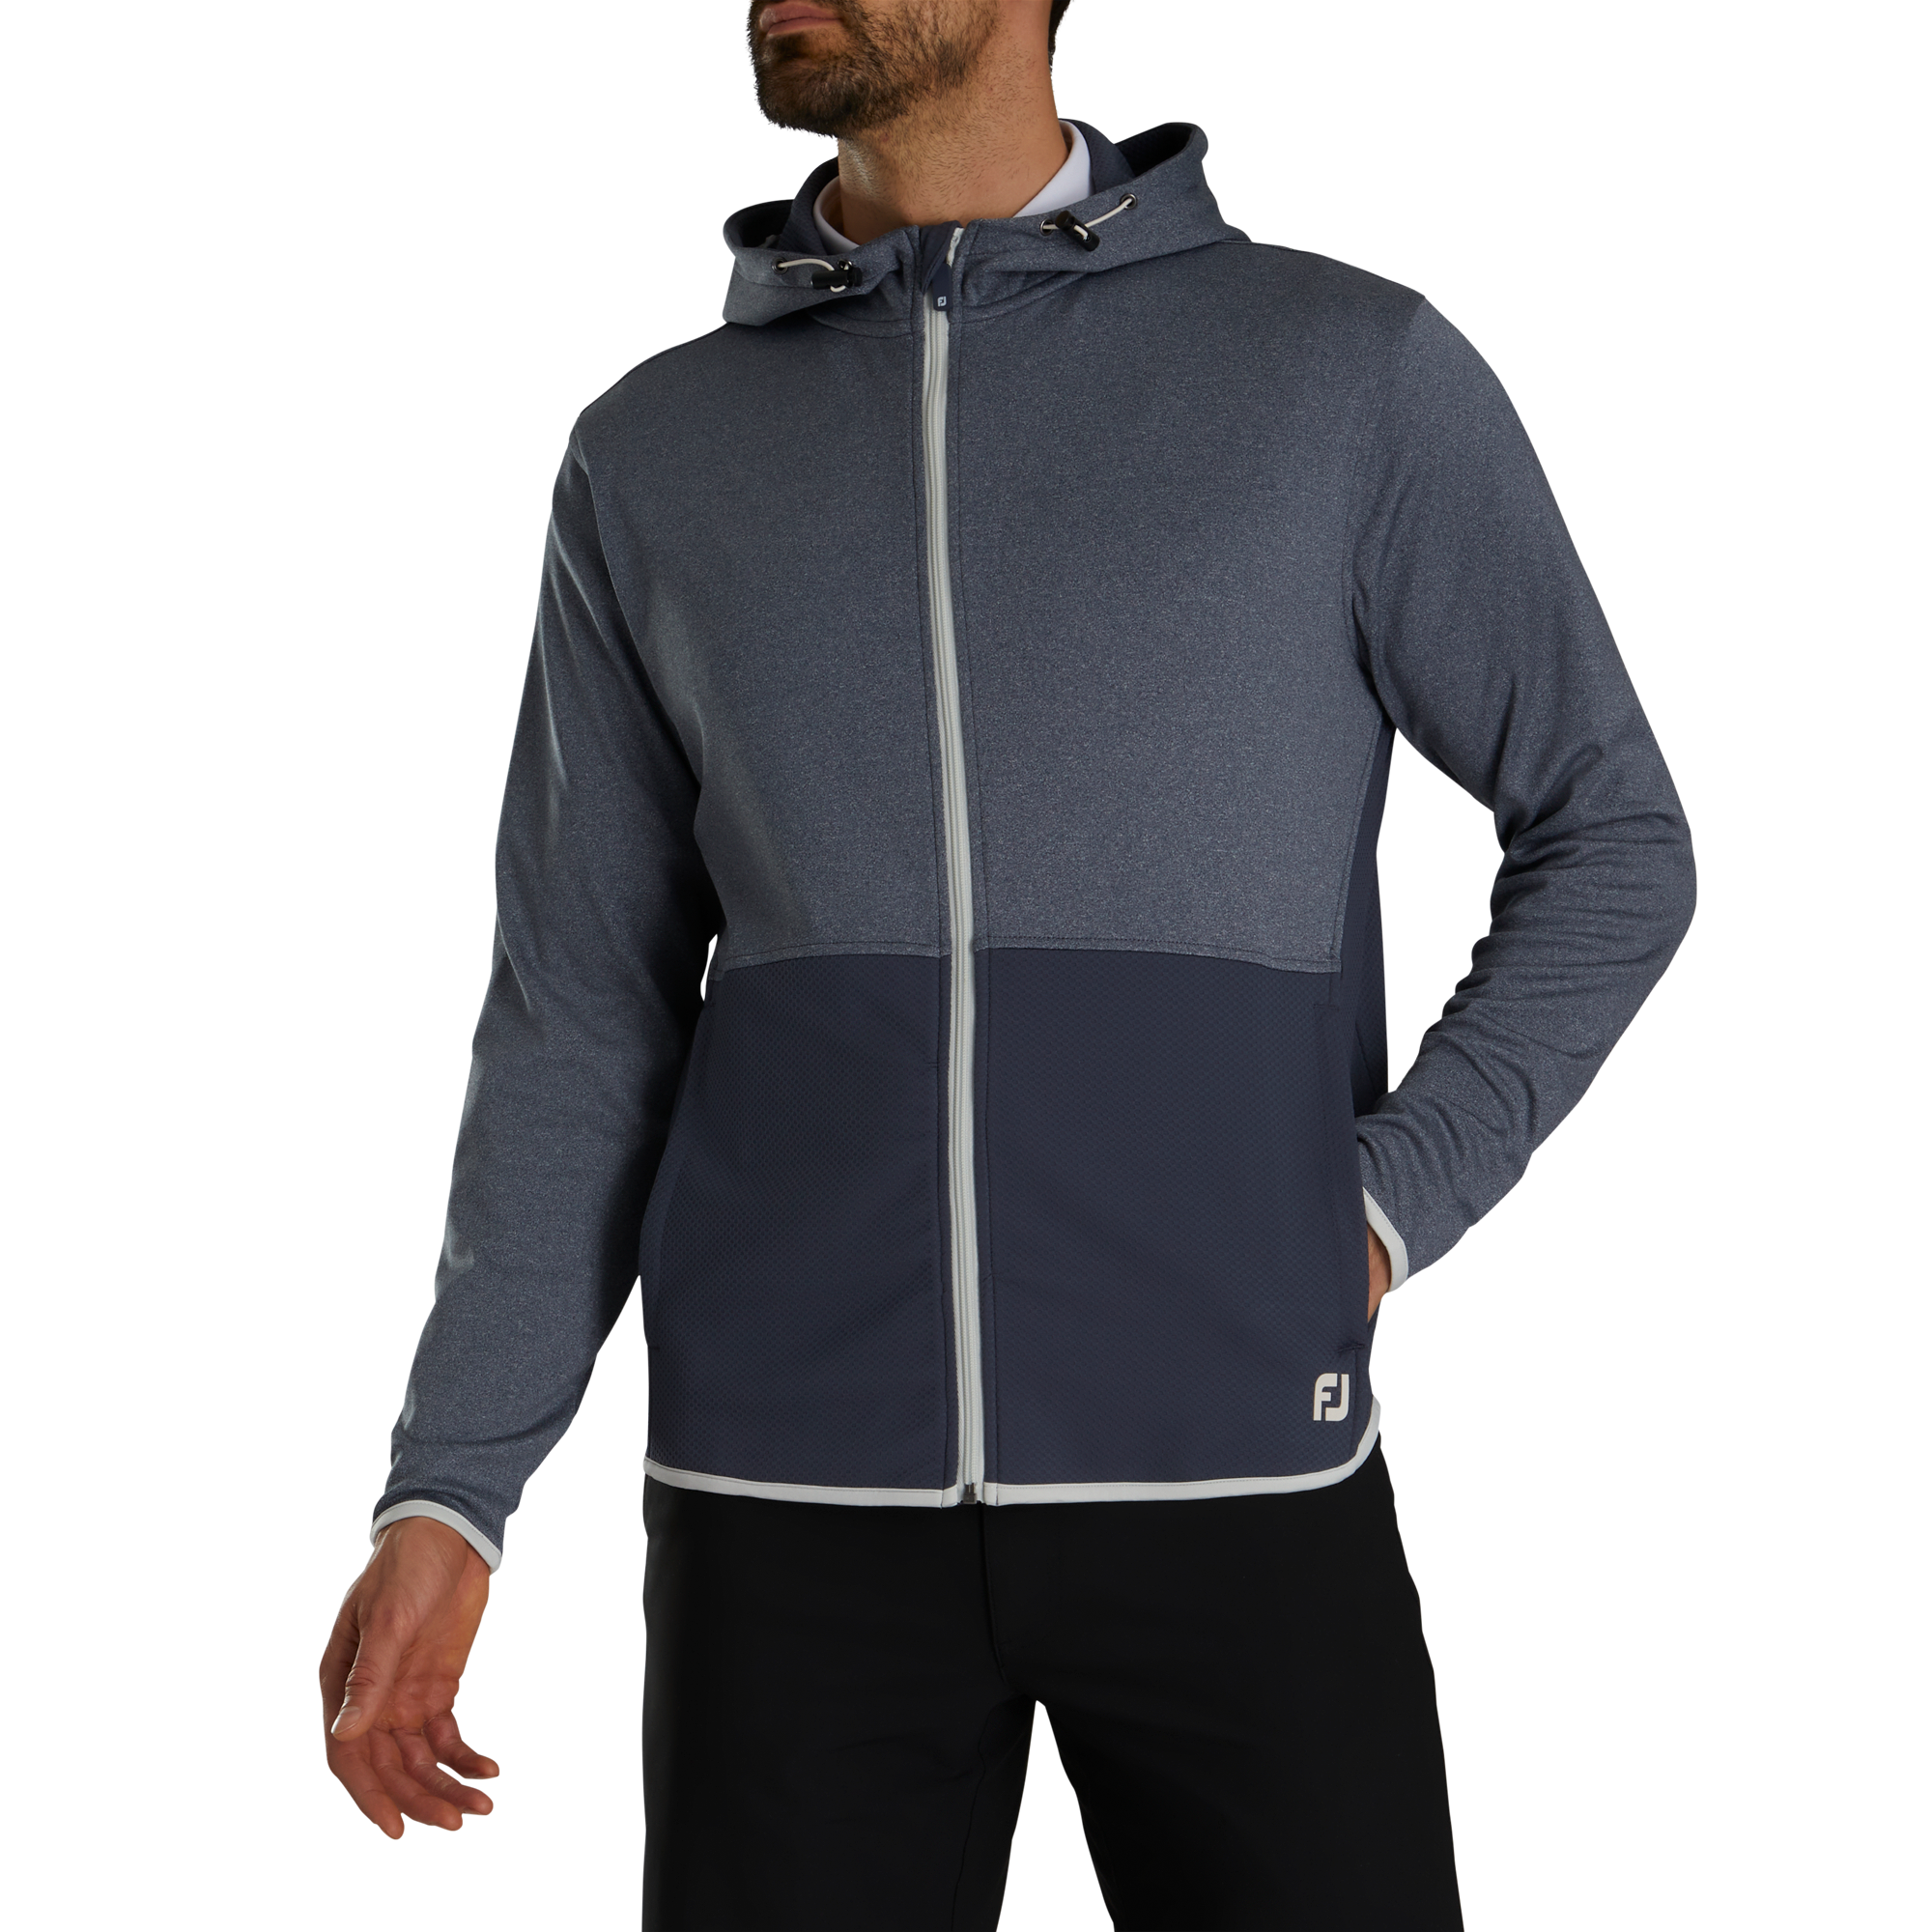 Lined Performance Sweater - FootJoy Canada